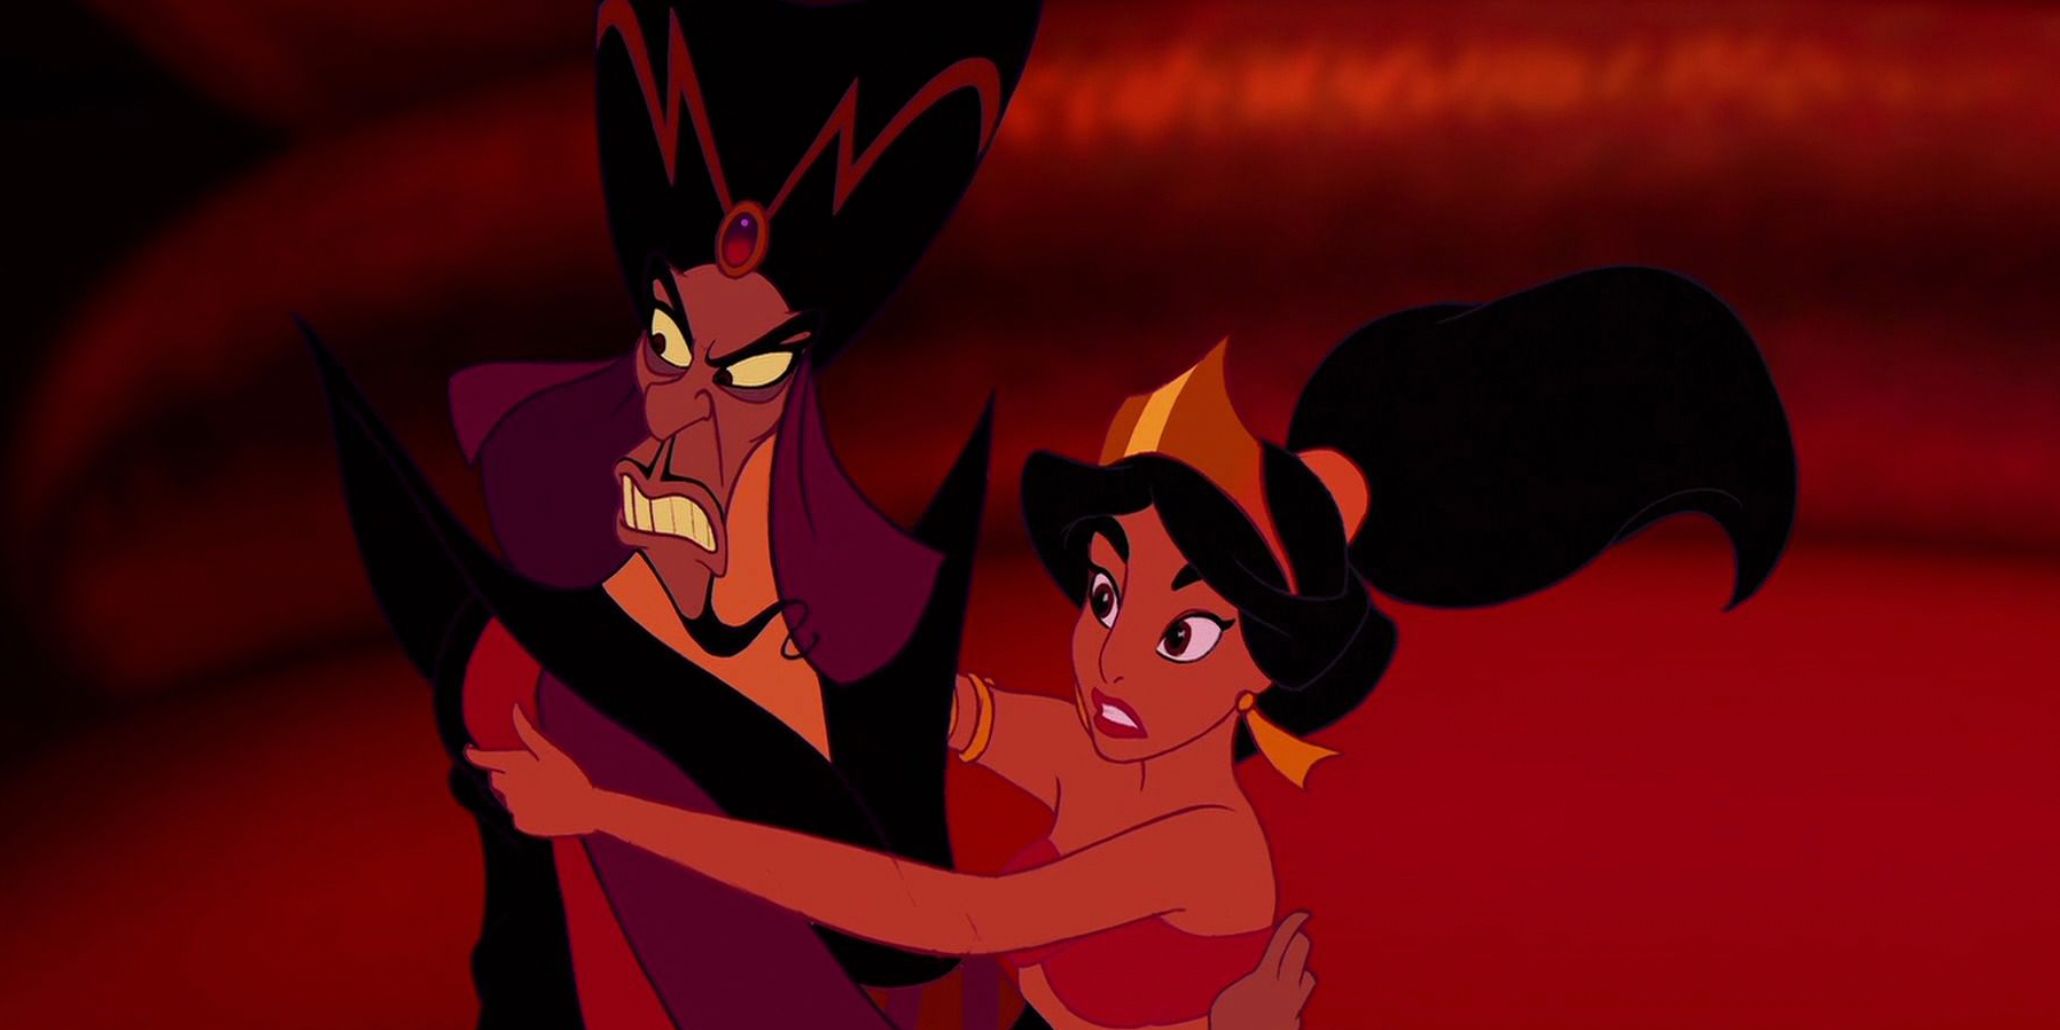 Jafar angrily turns away from Jasmine in the animated Aladdin movie